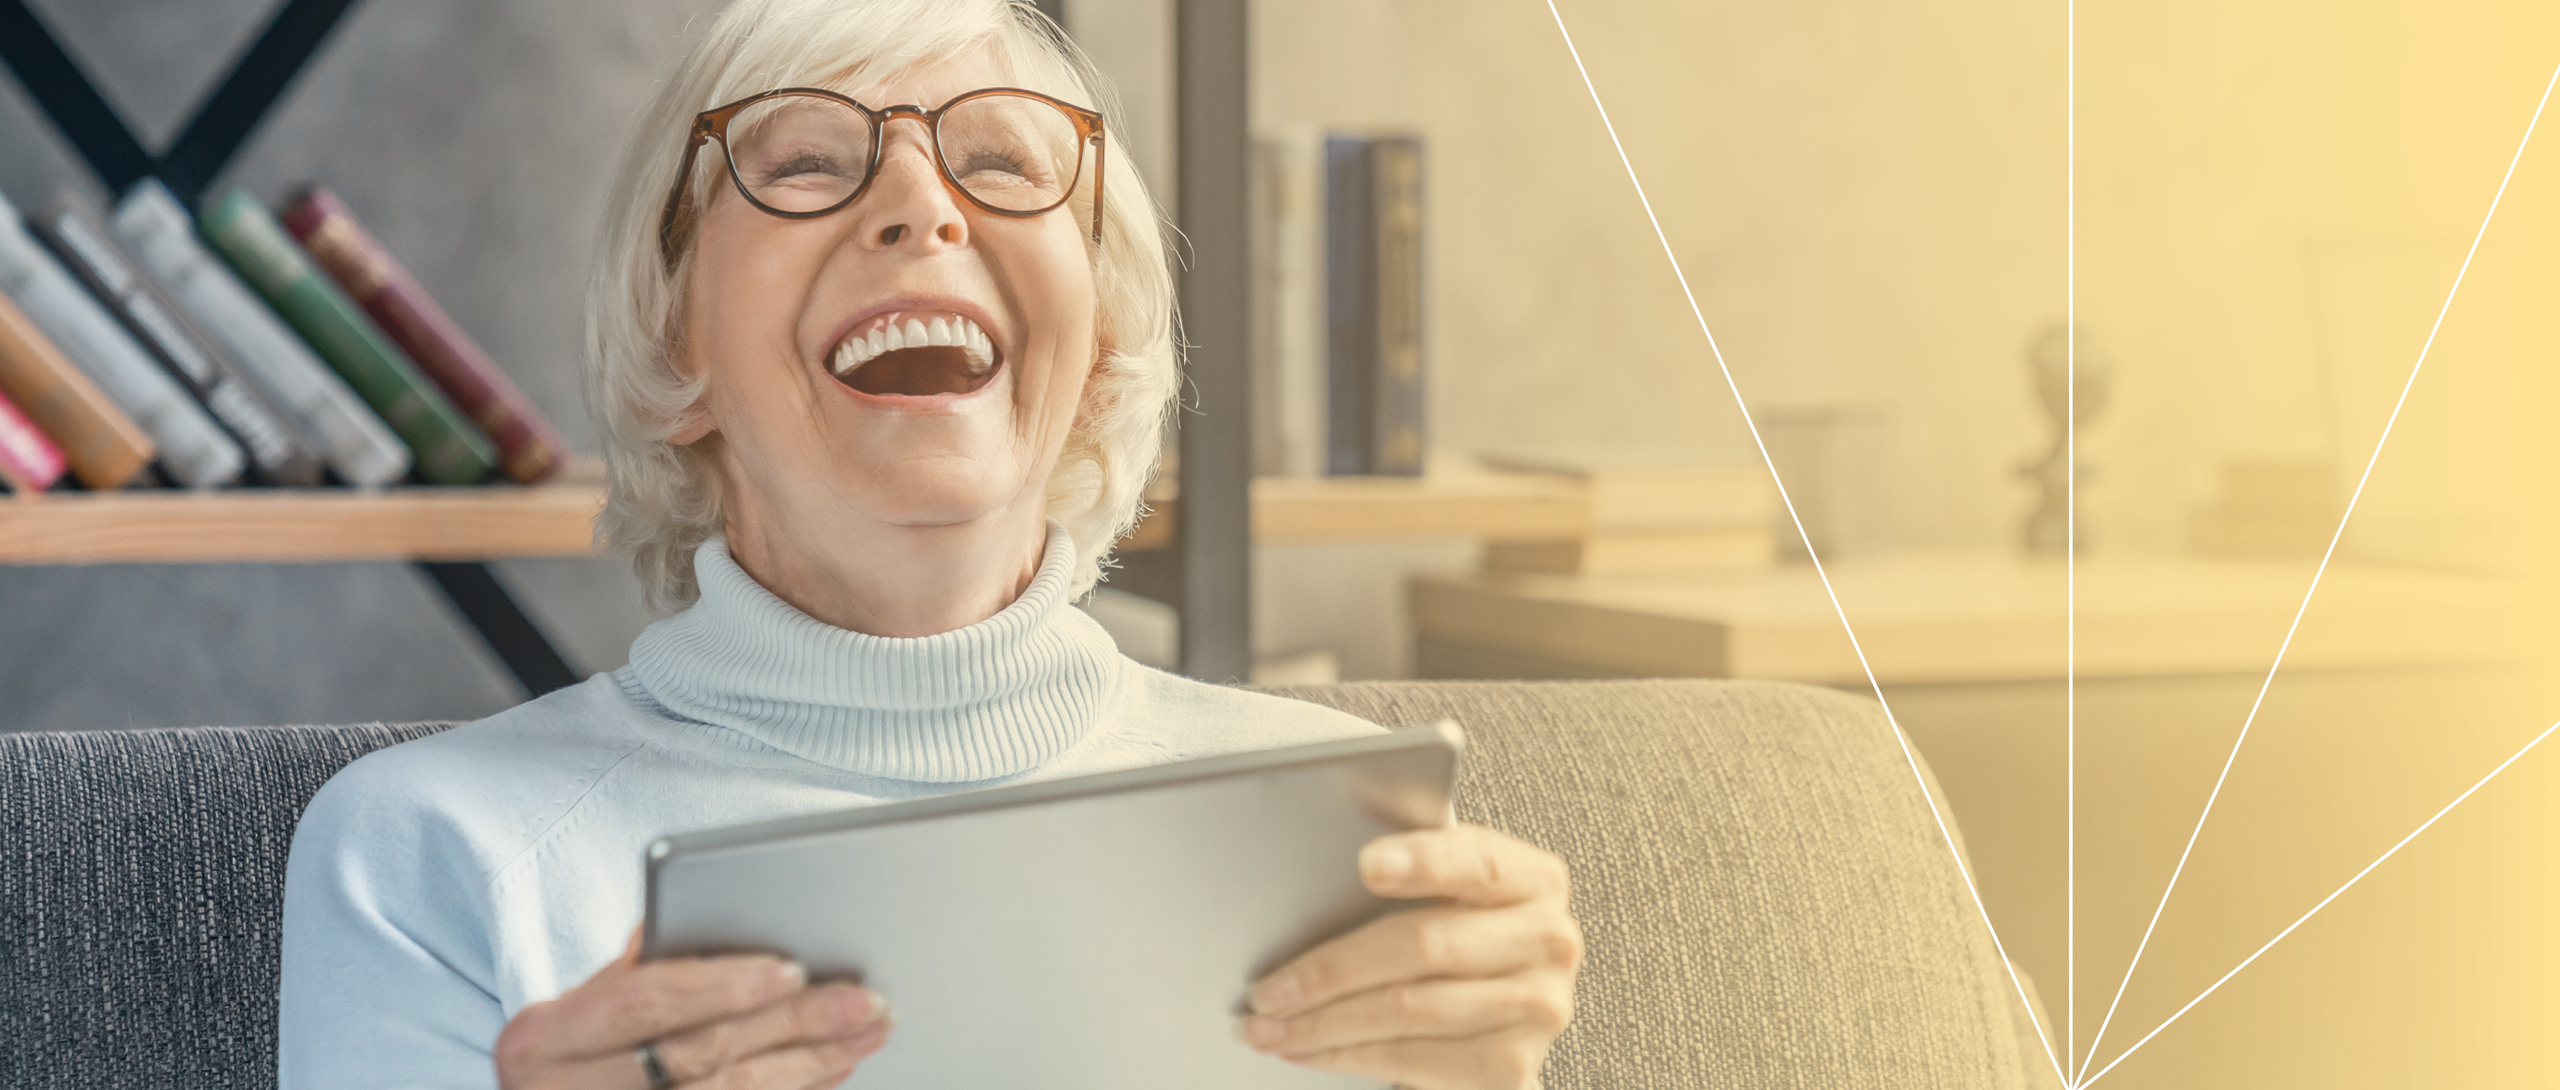 Woman laughing while holding a tablet